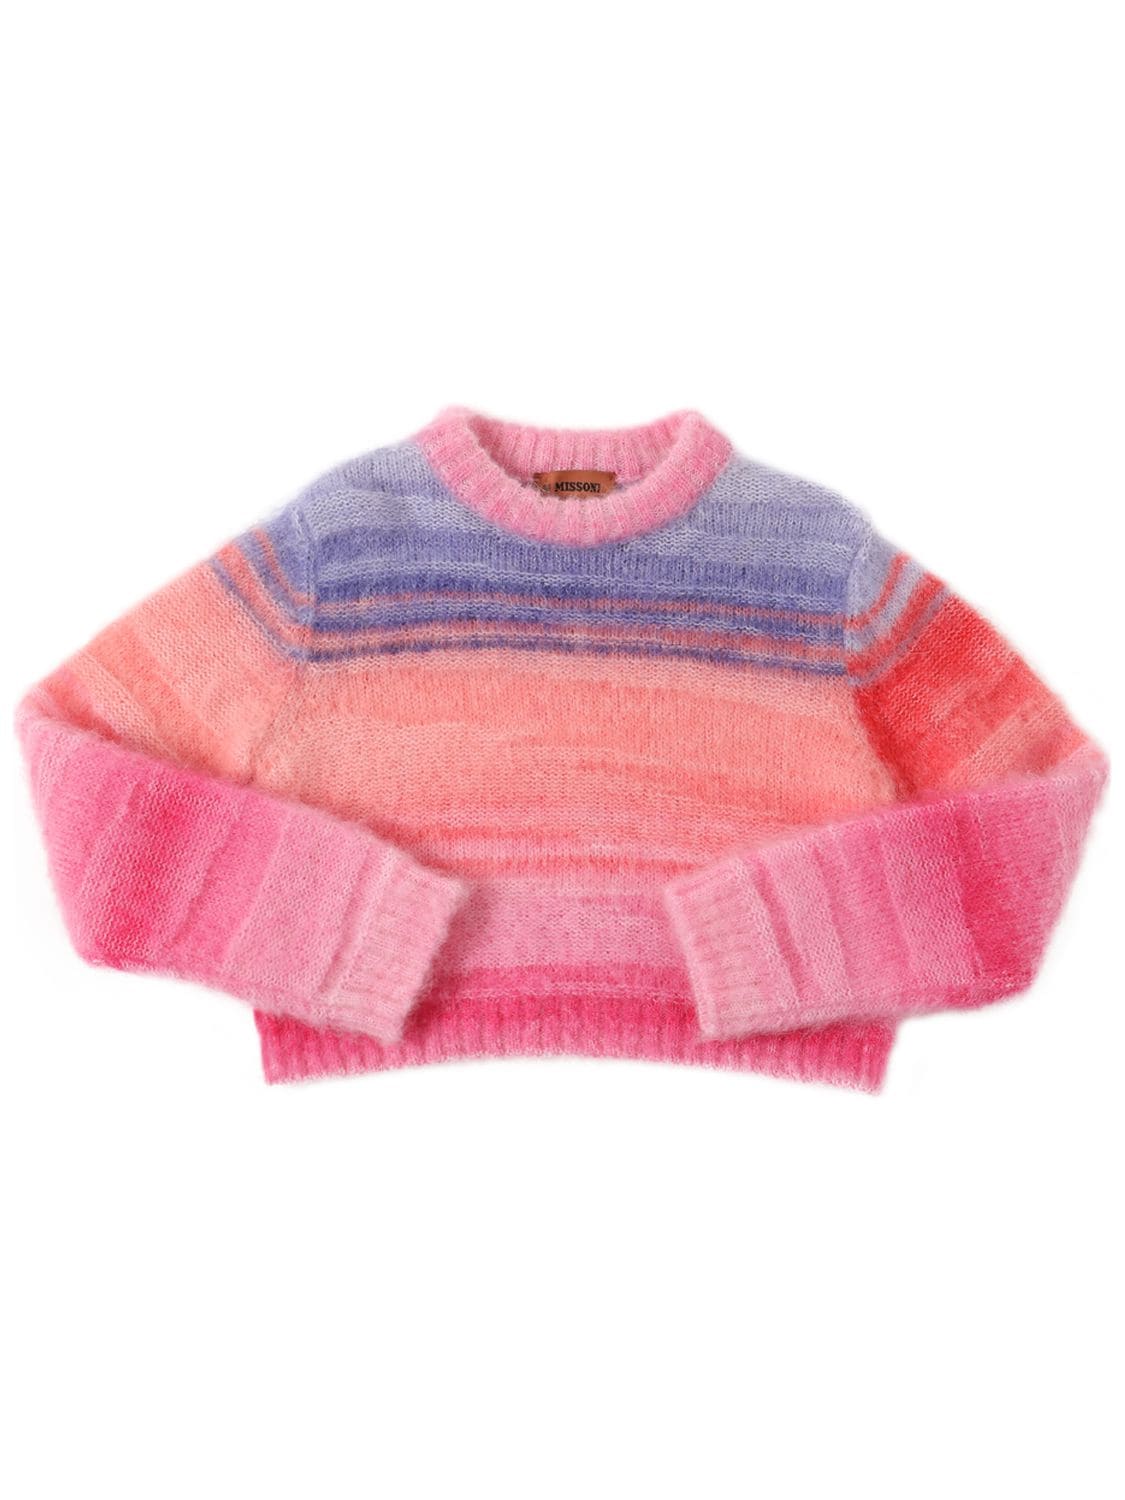 Missoni Kids' Alpaca & Mohair Knit Cropped Sweater In Multicolor